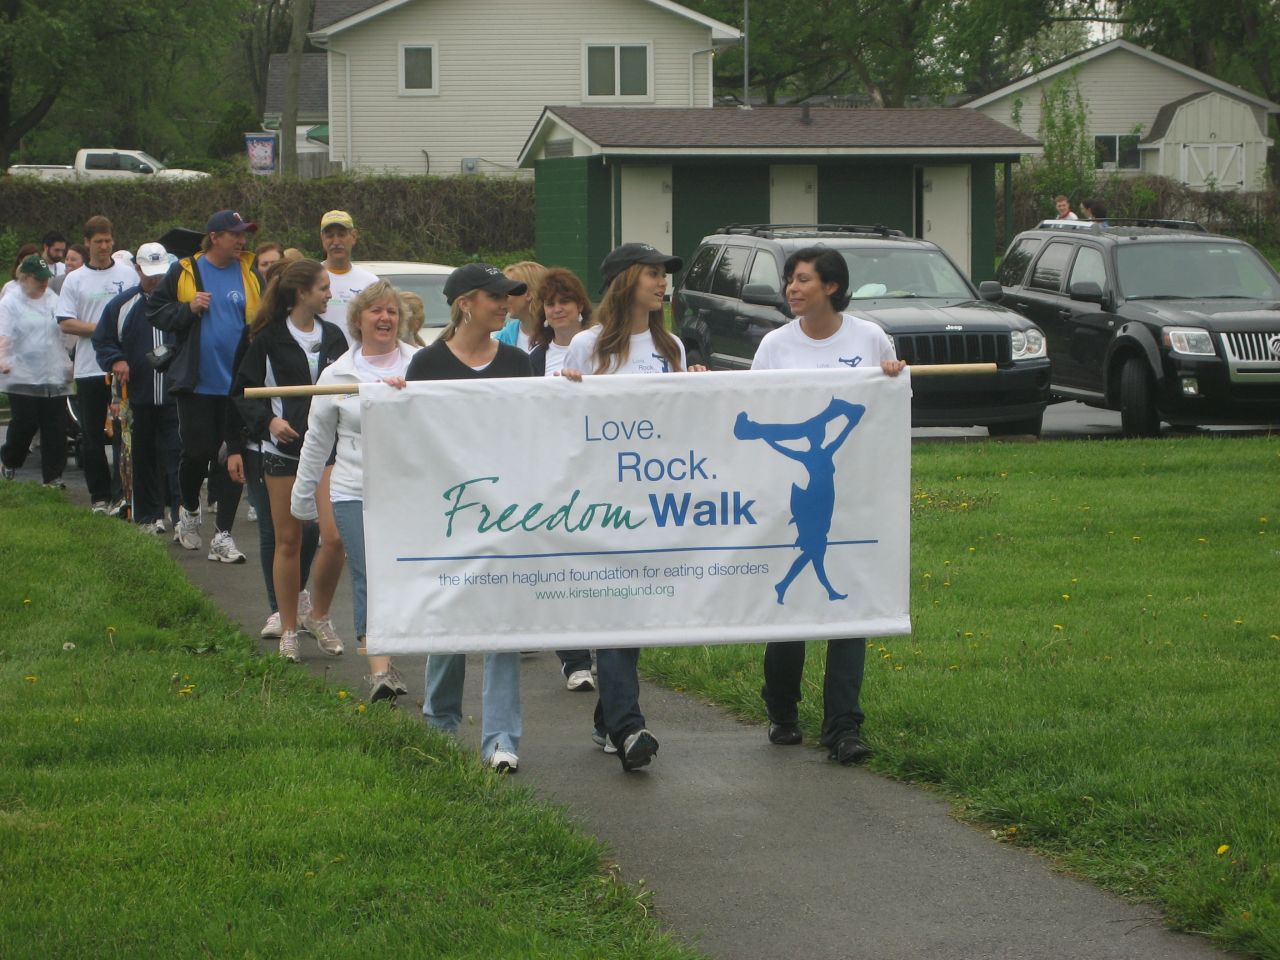 Haglund walks to raise money for the awareness and treatment of eating disorders. The Freedom Walk was held by the Kirsten Haglund Foundation in Michigan in 2011.